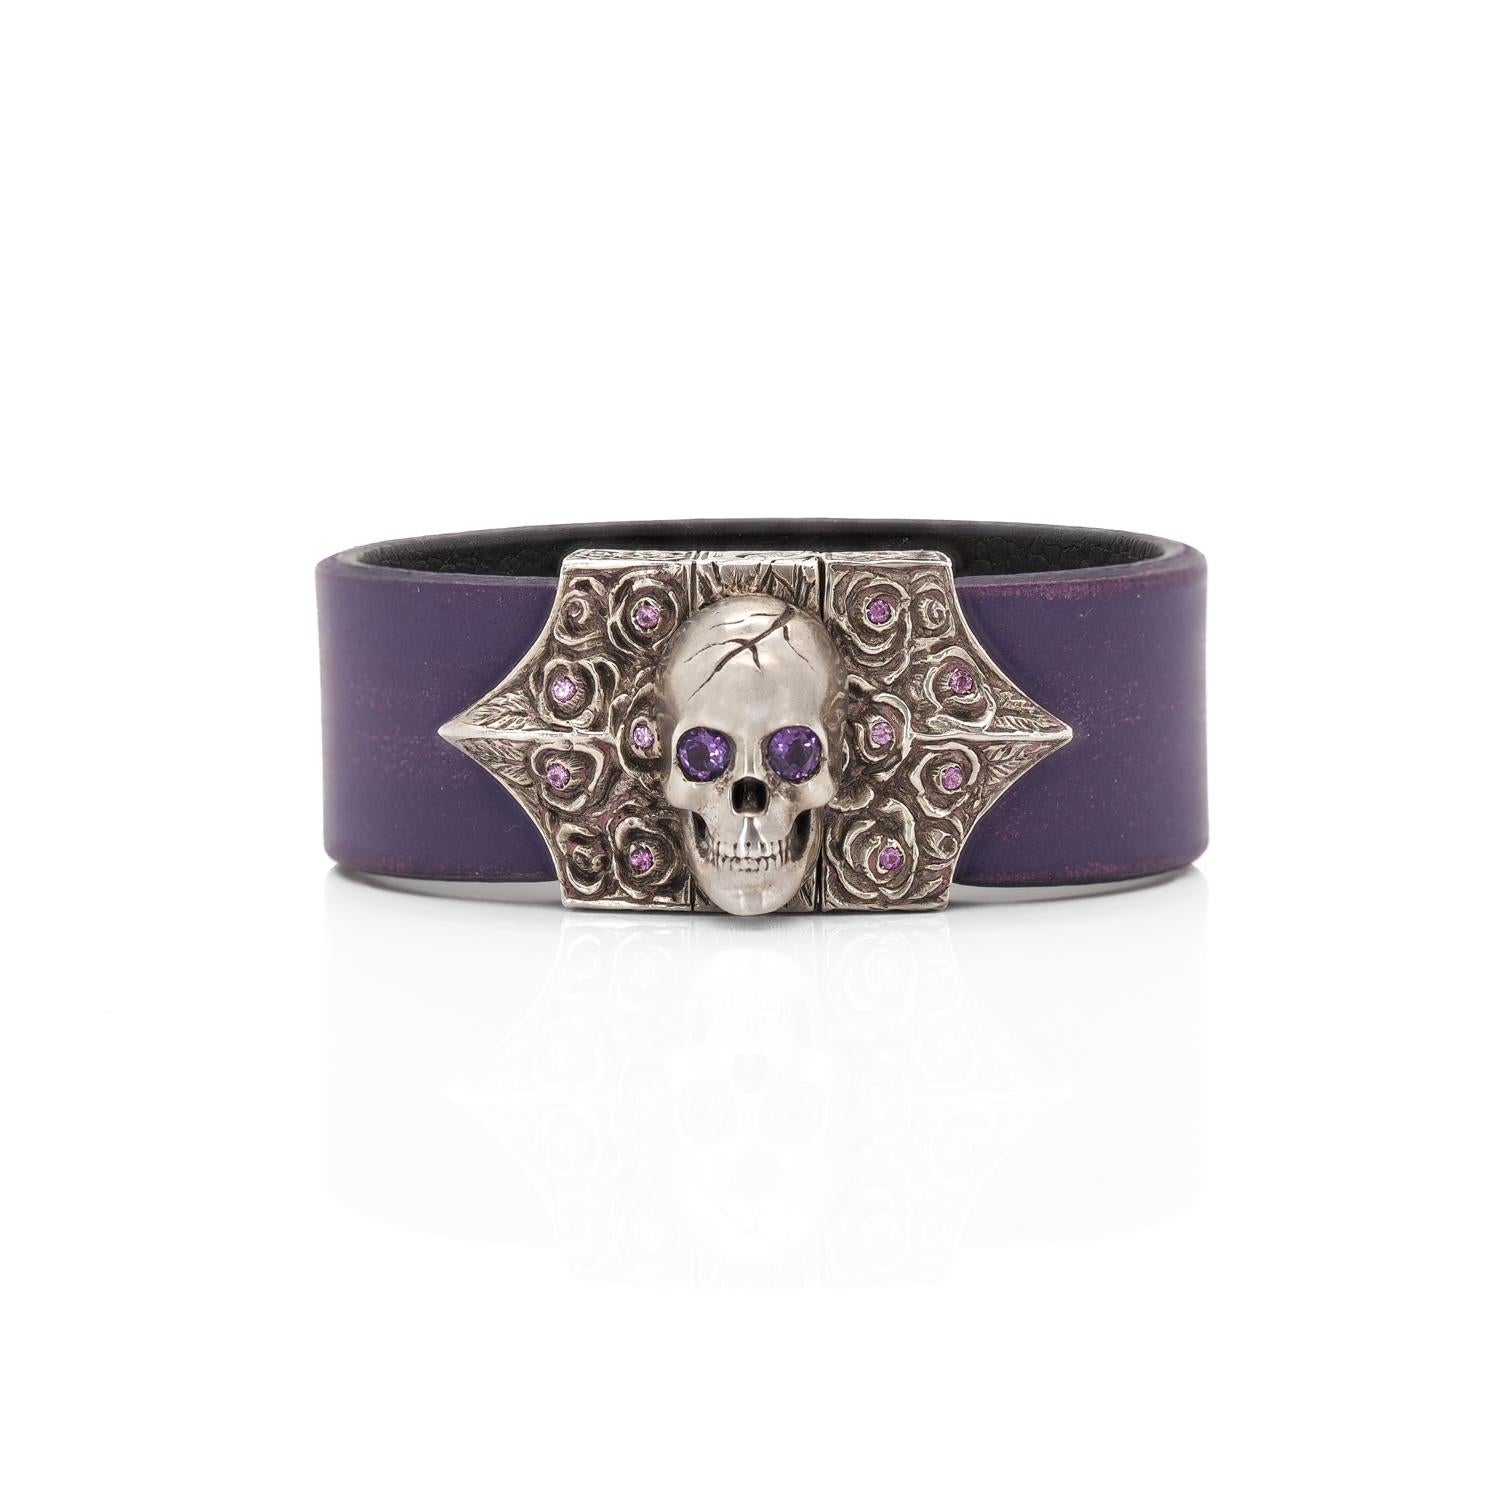 The Skull & Roses Bracelet is embellished with rose engravings set with pink sapphires. The amethyst eyes of the skull adds a special glare to the bracelet.
The bracelet is strapped by a violet leather strap, making it both stylish and comfortable